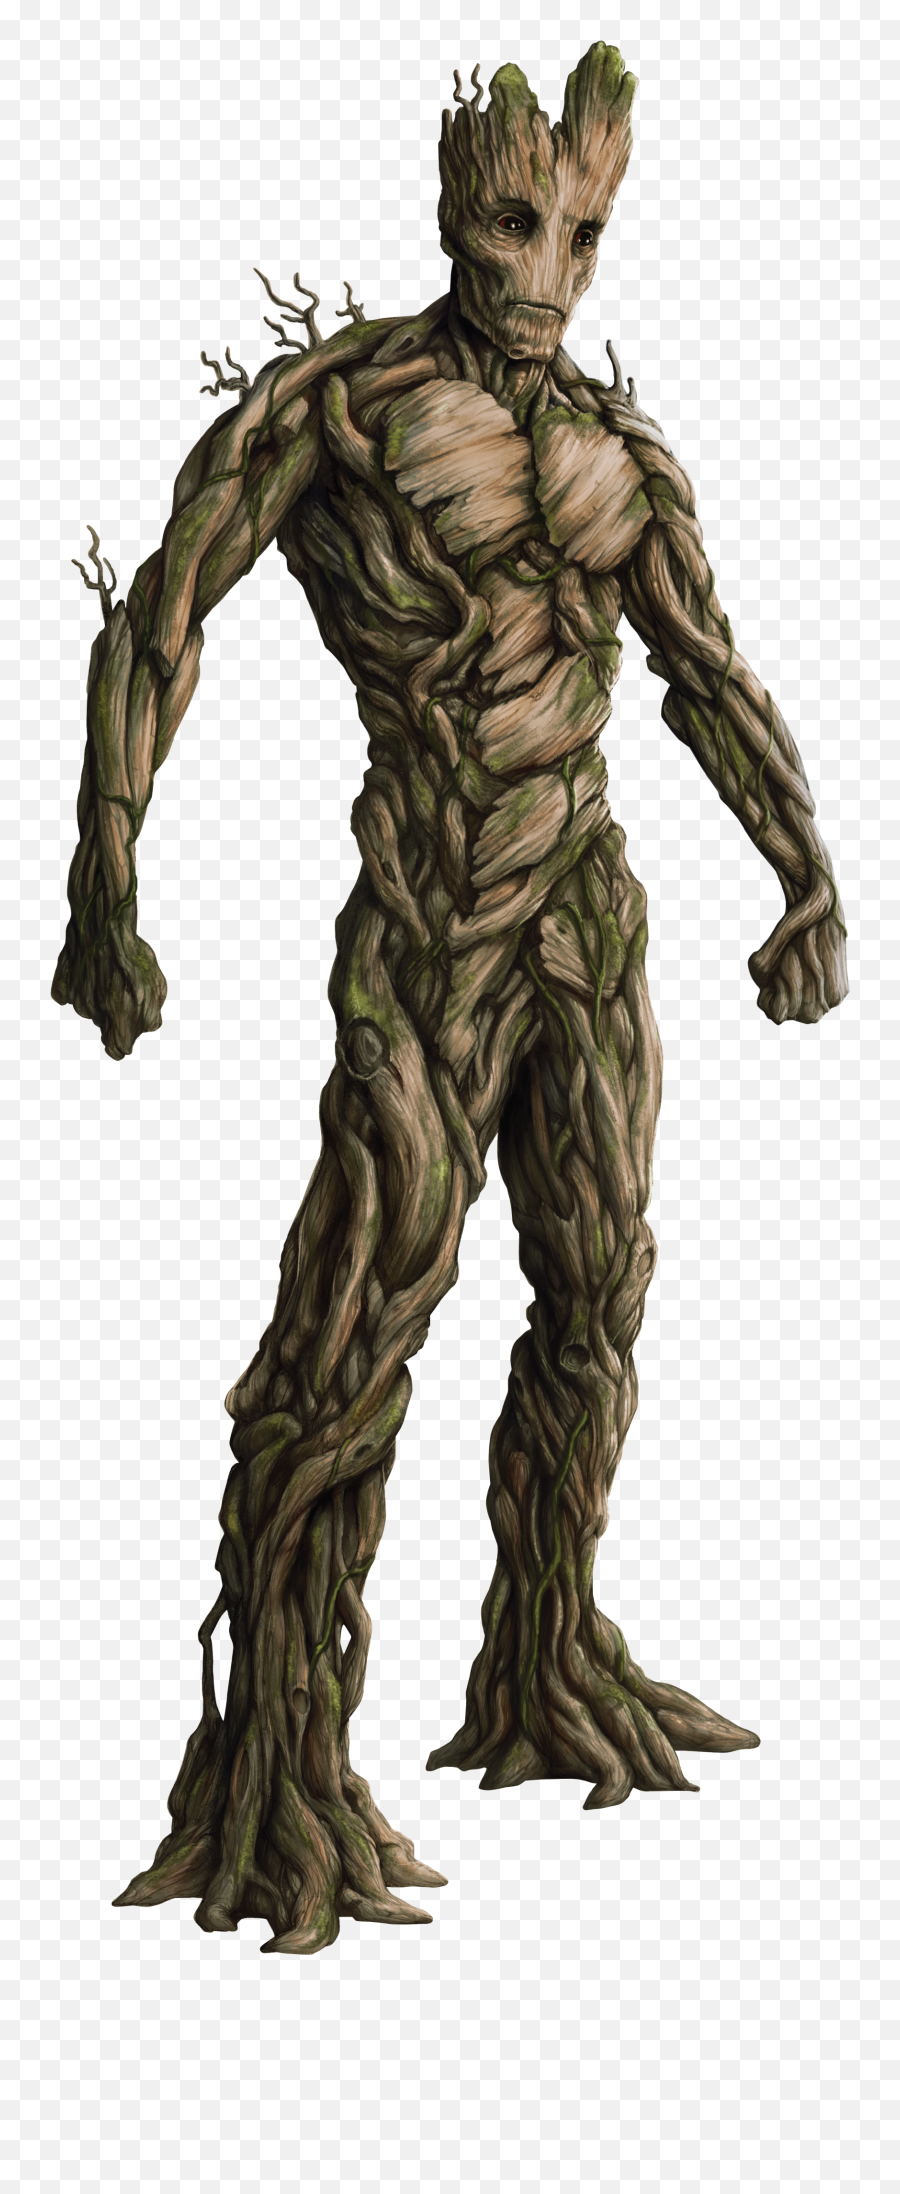 Groot Png - Guardians Of The Galaxy Groot Png,Groot Png